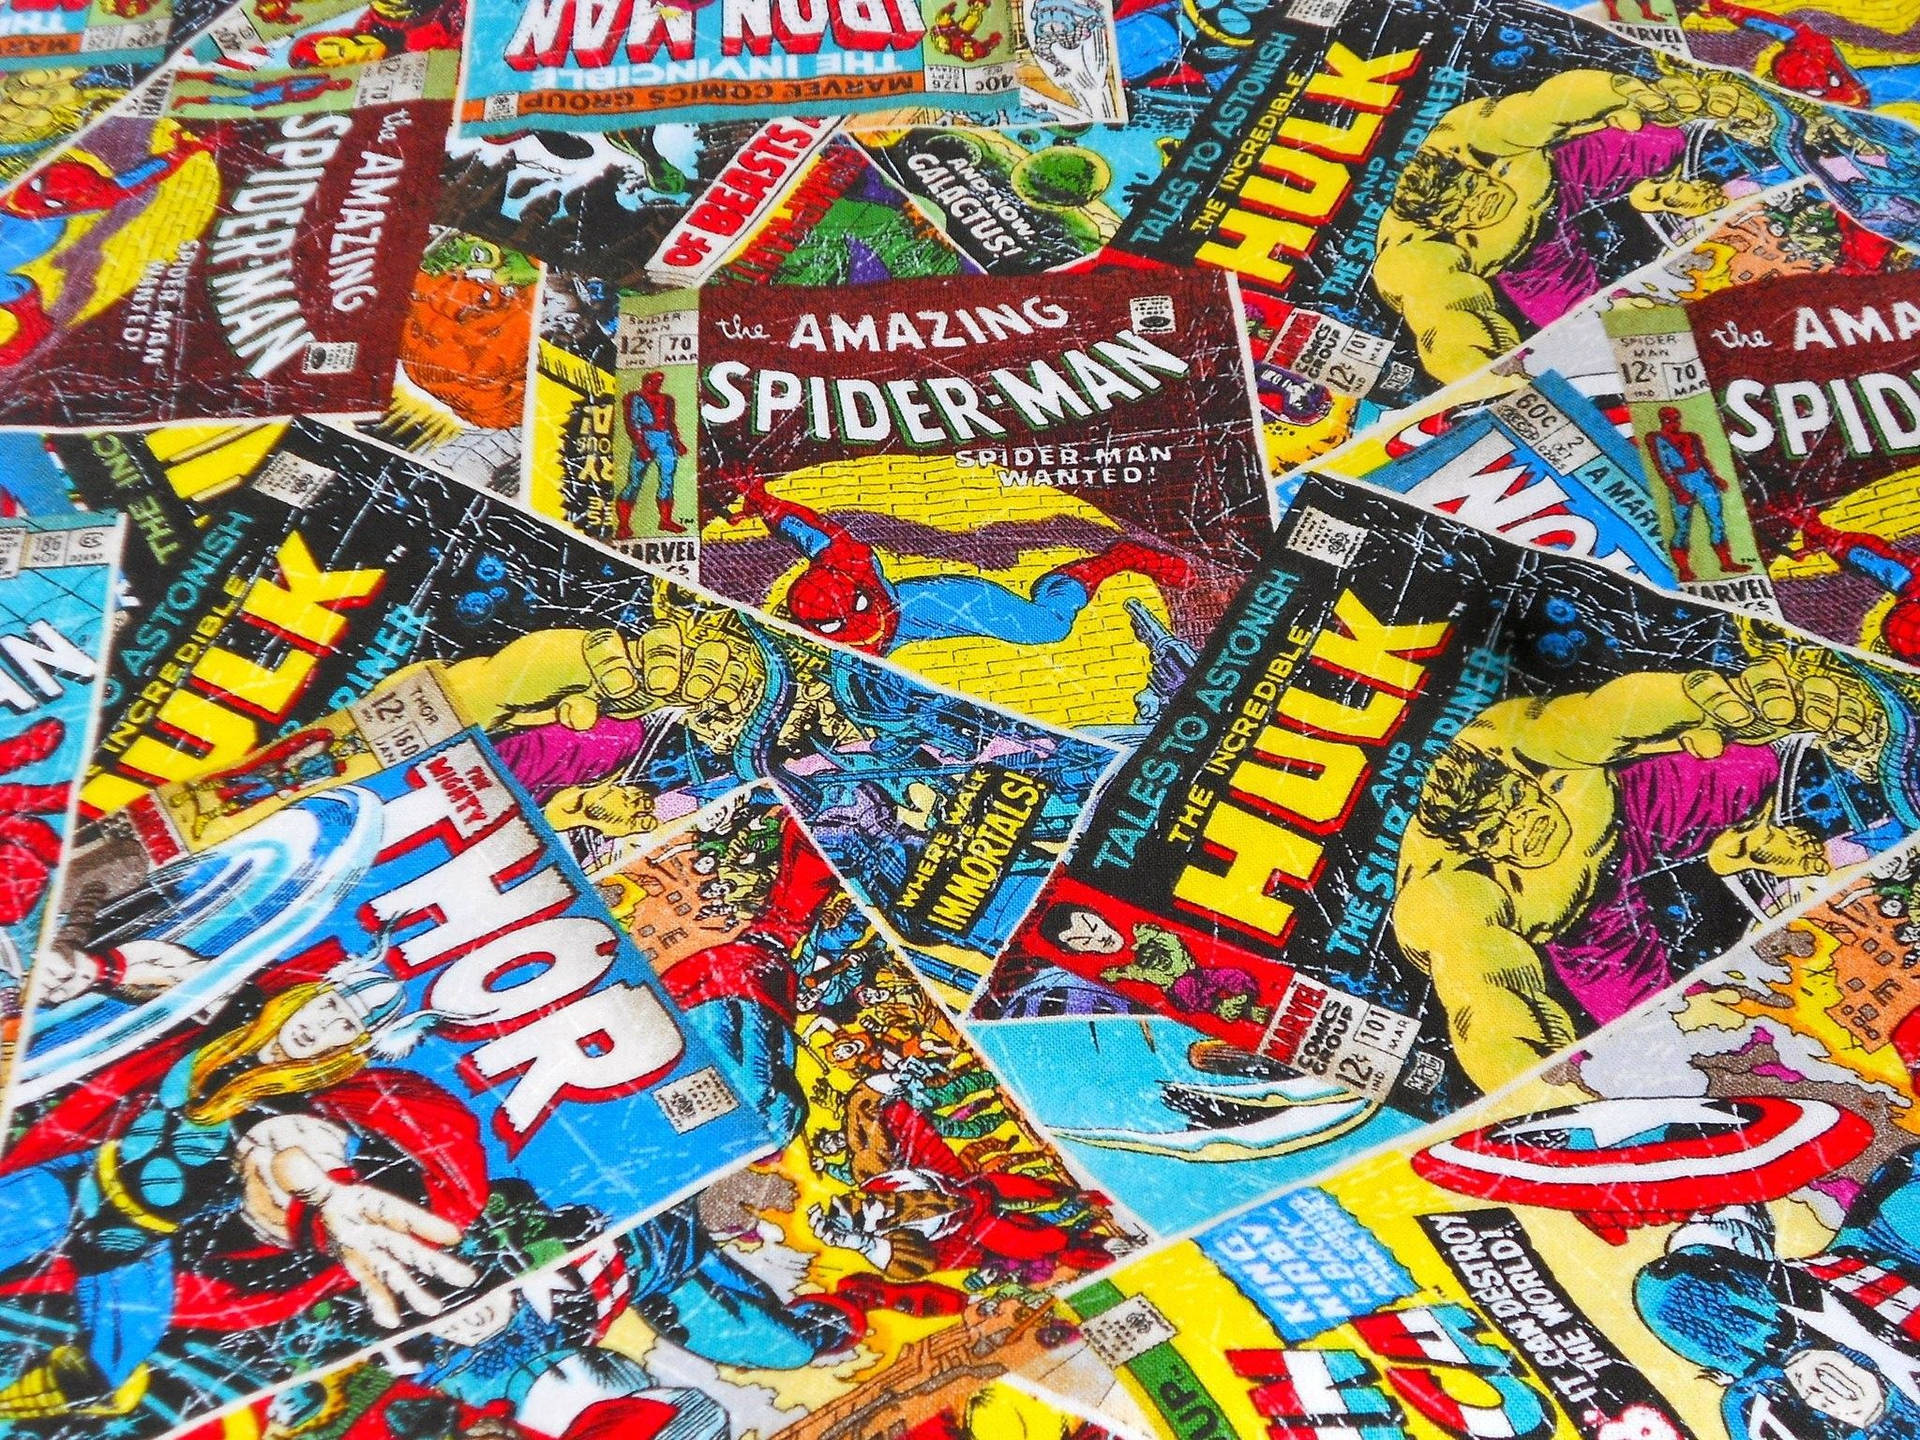 Marvel Comics Book Cover Collection Background